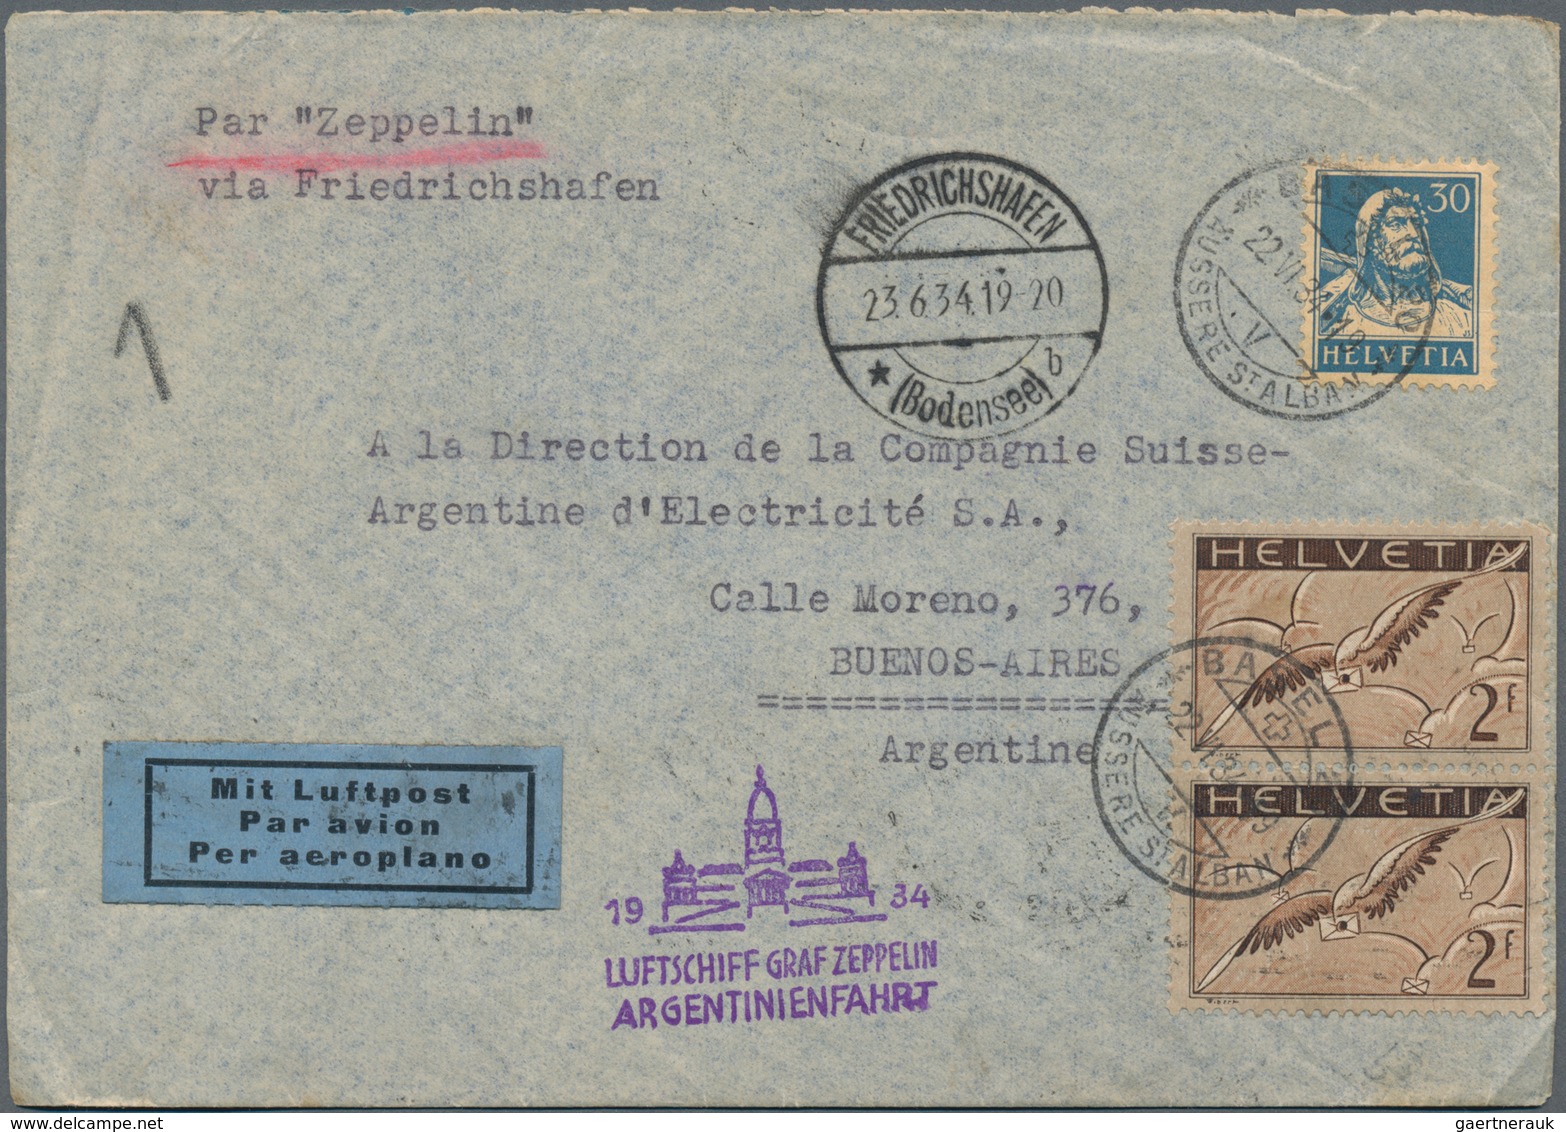 Zeppelinpost Europa: 1910's-1930's: Group of 46 covers and postcards flown by ZEPPELIN or special ai